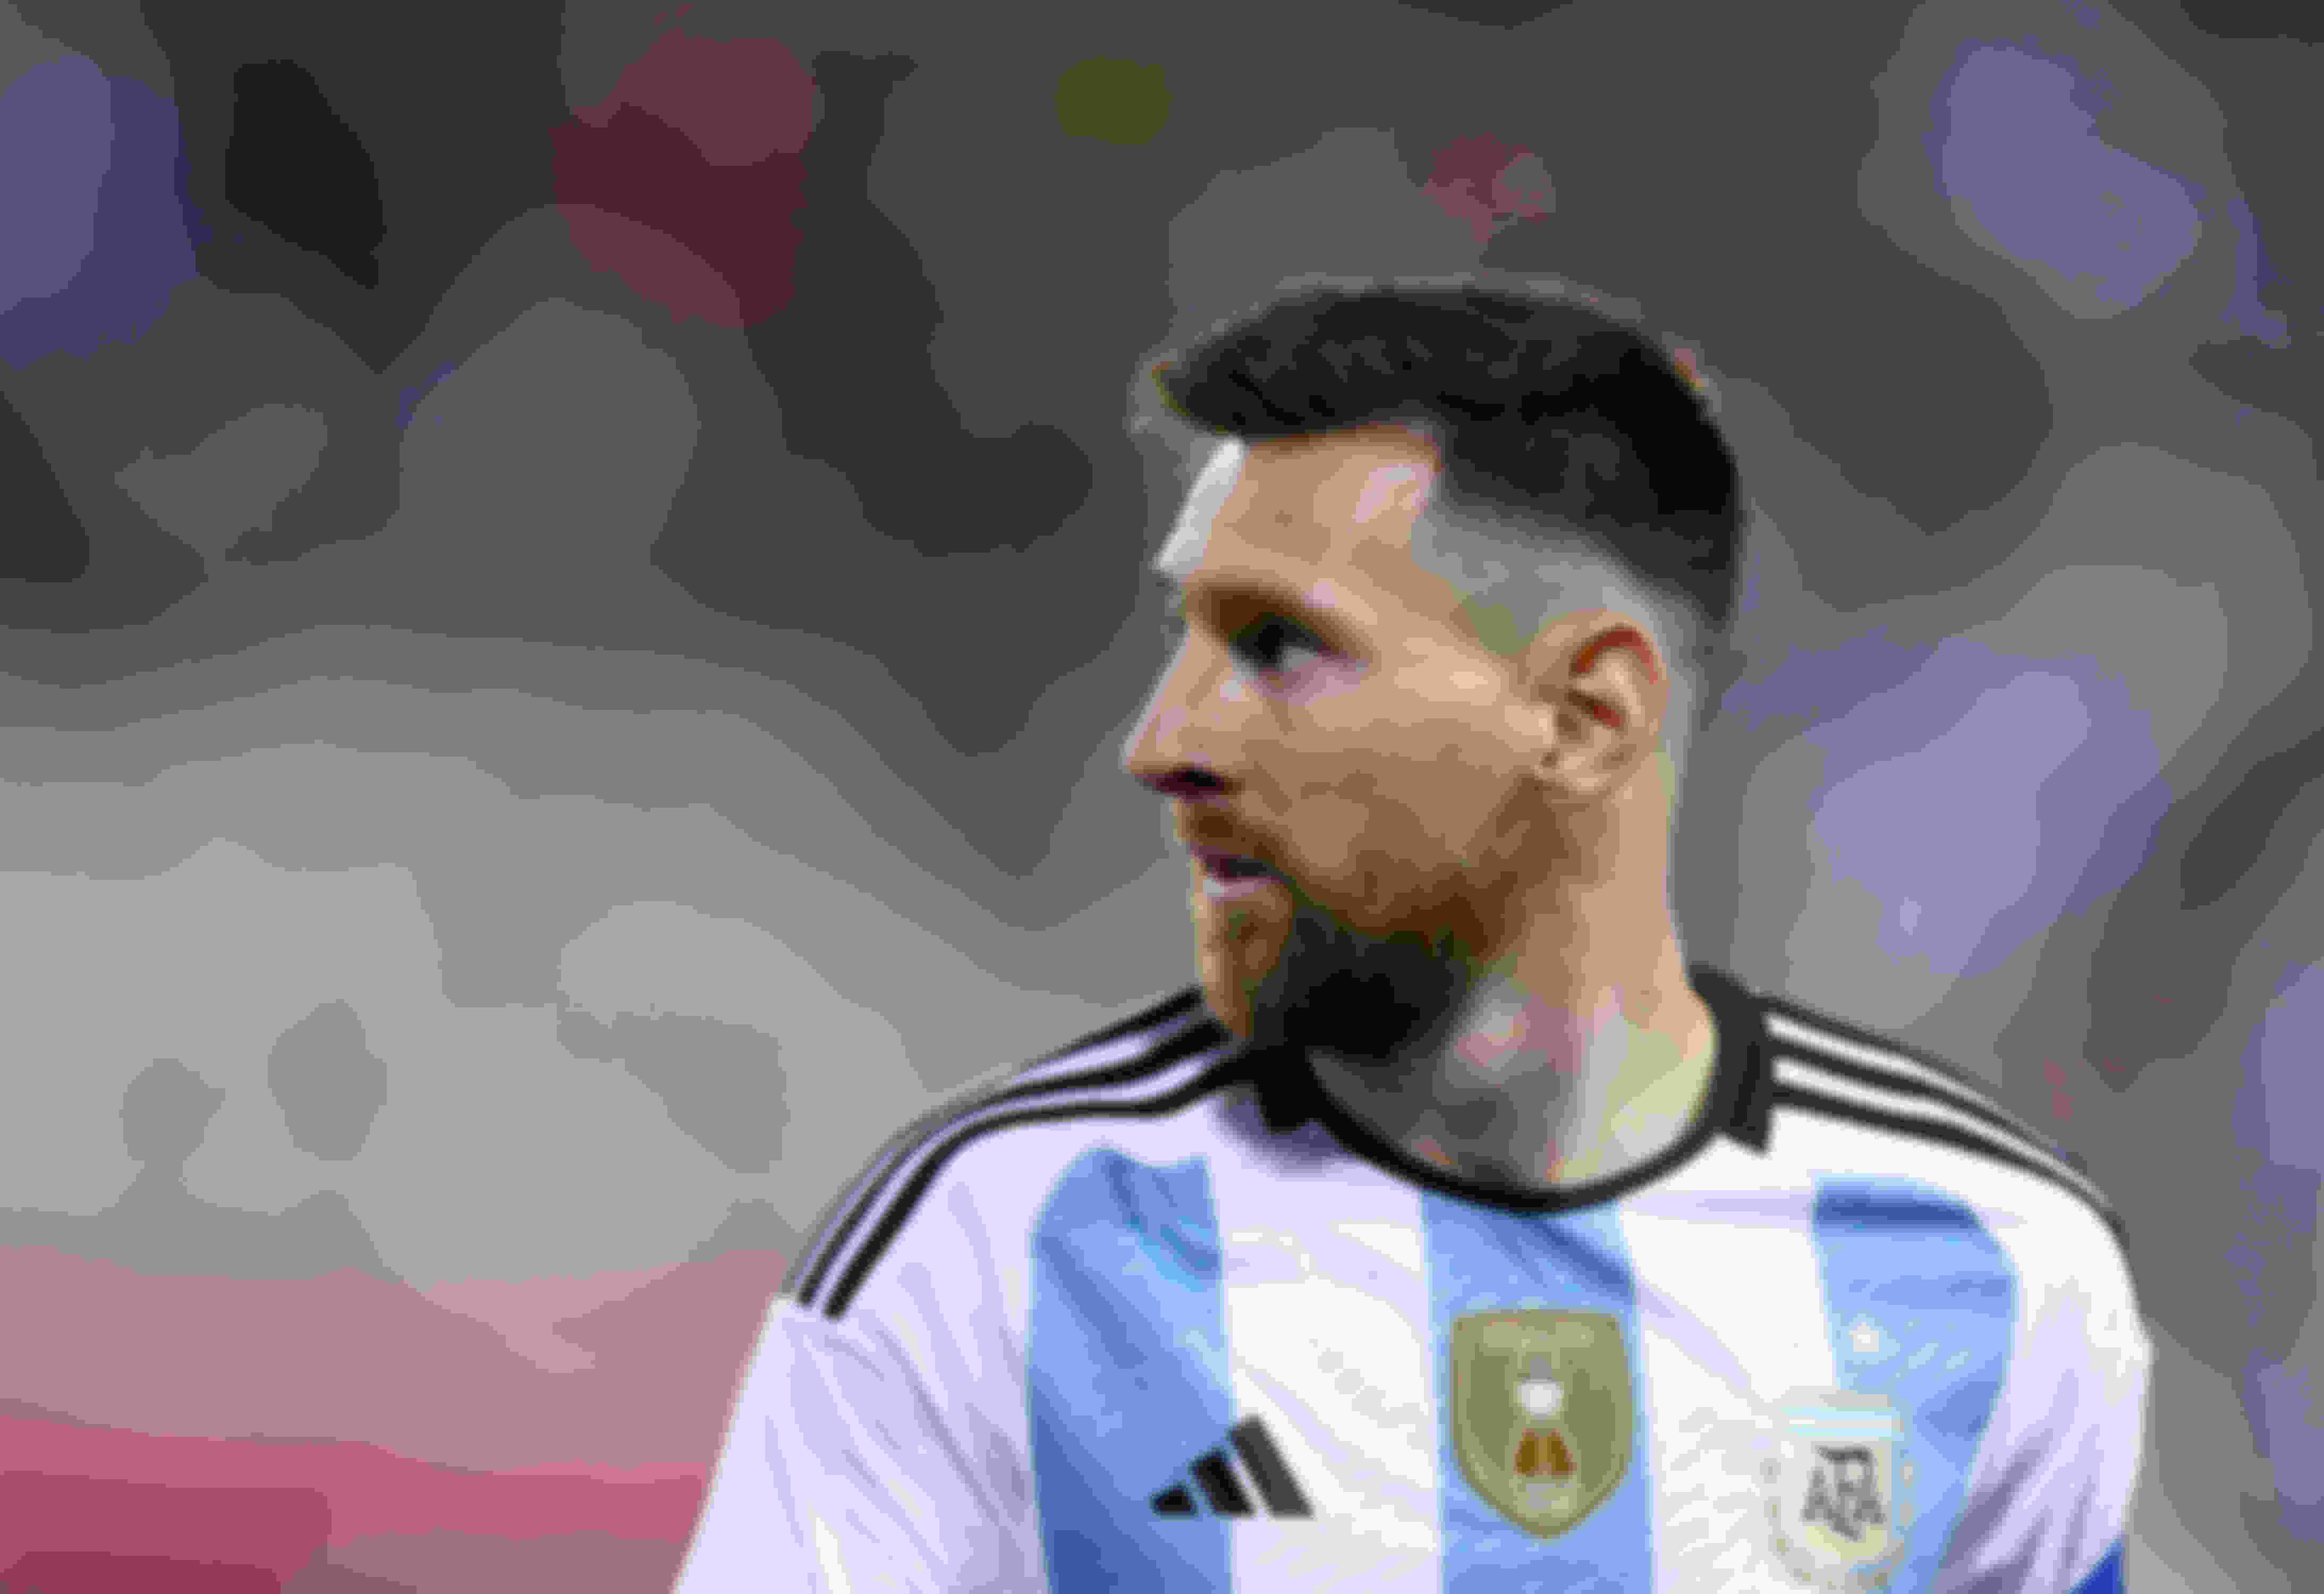 The 2021 Copa America marked Messi's first international title